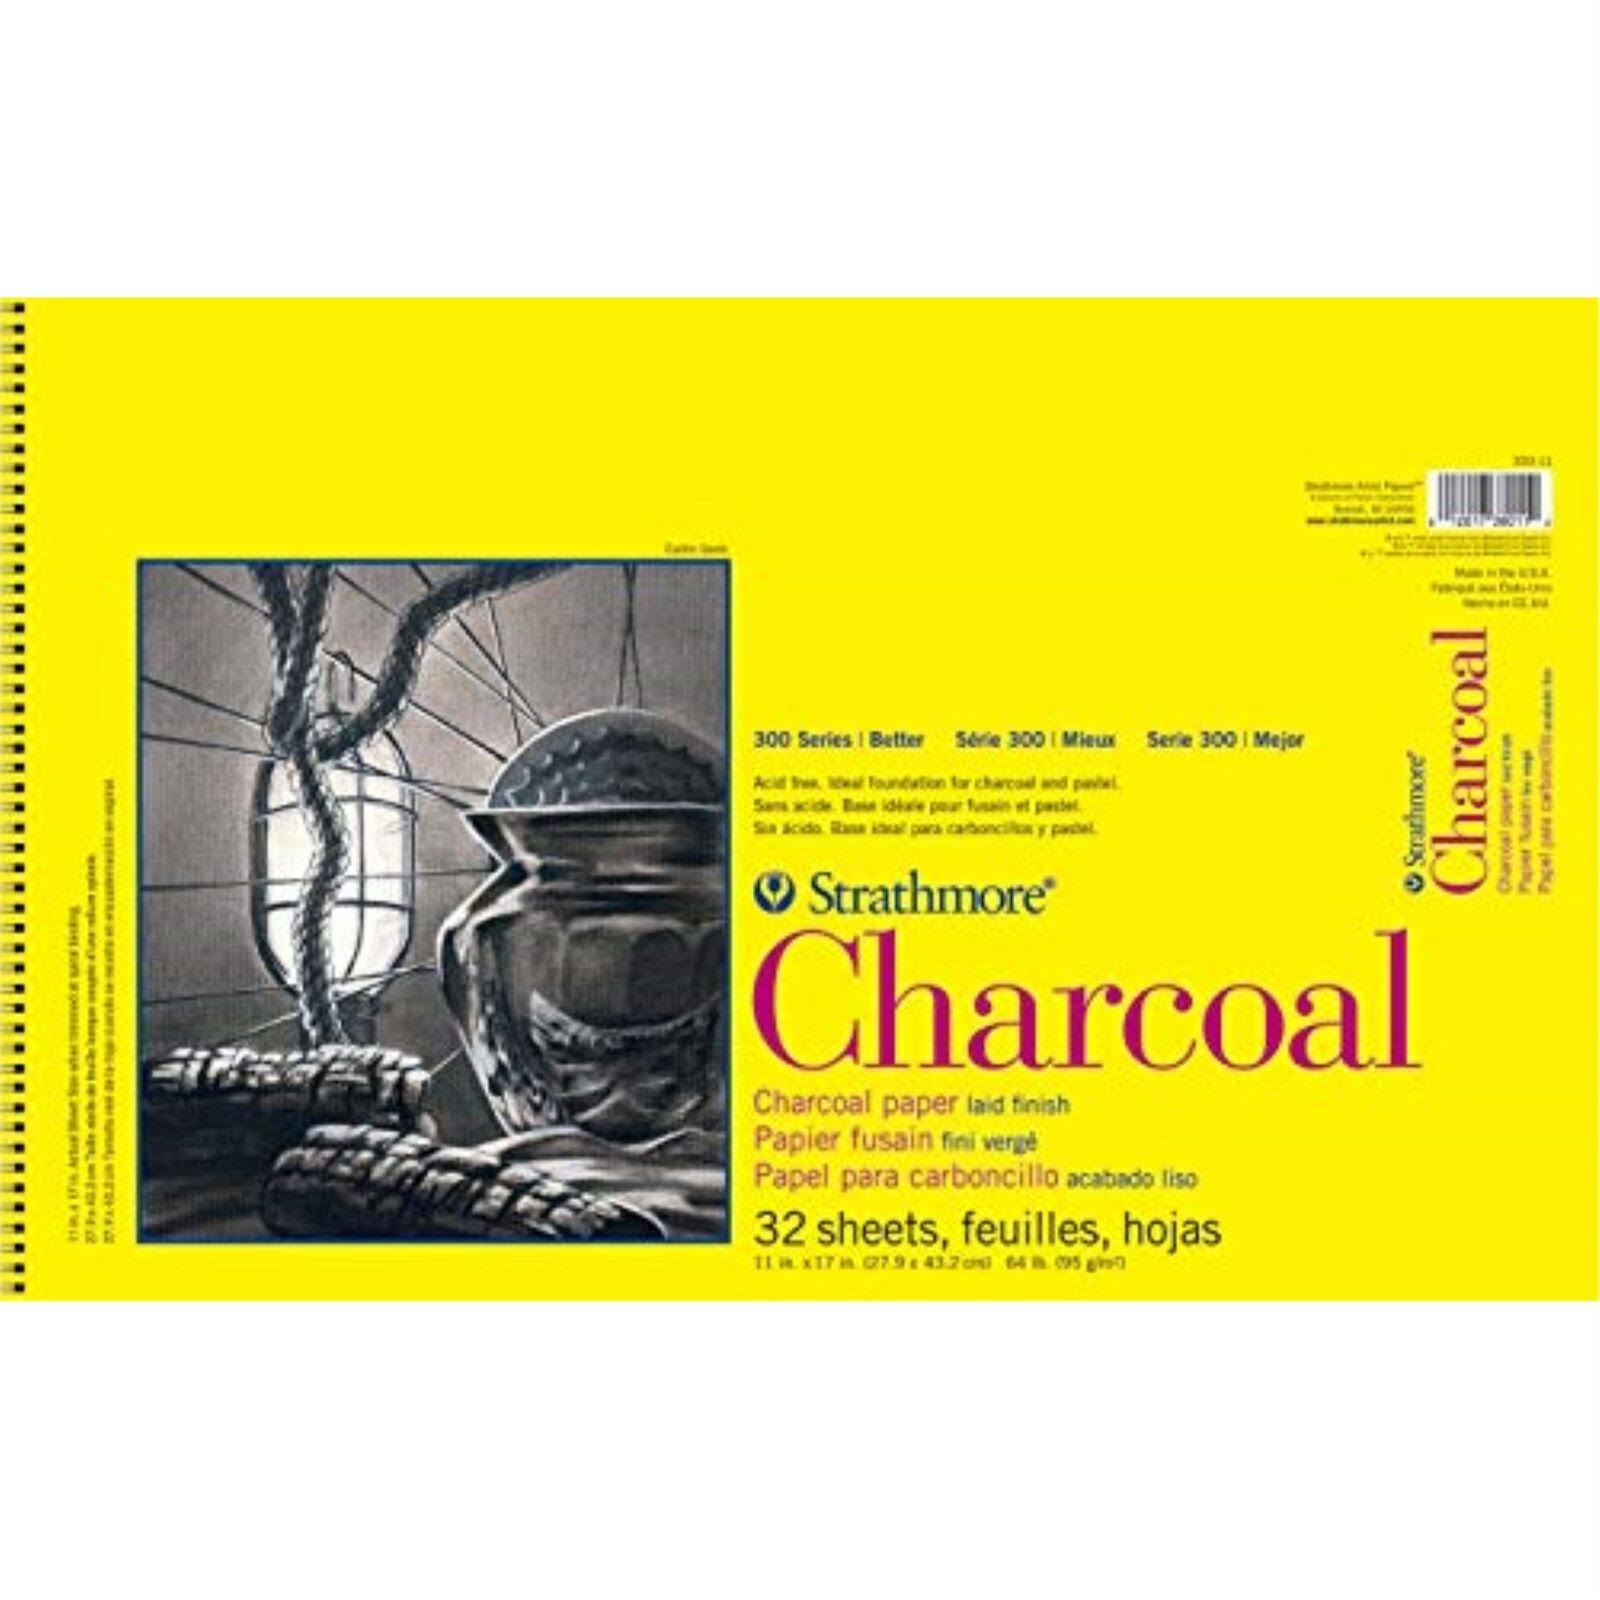 Strathmore Charcoal Paper Pad - White, 11" X 17", 32 sheets